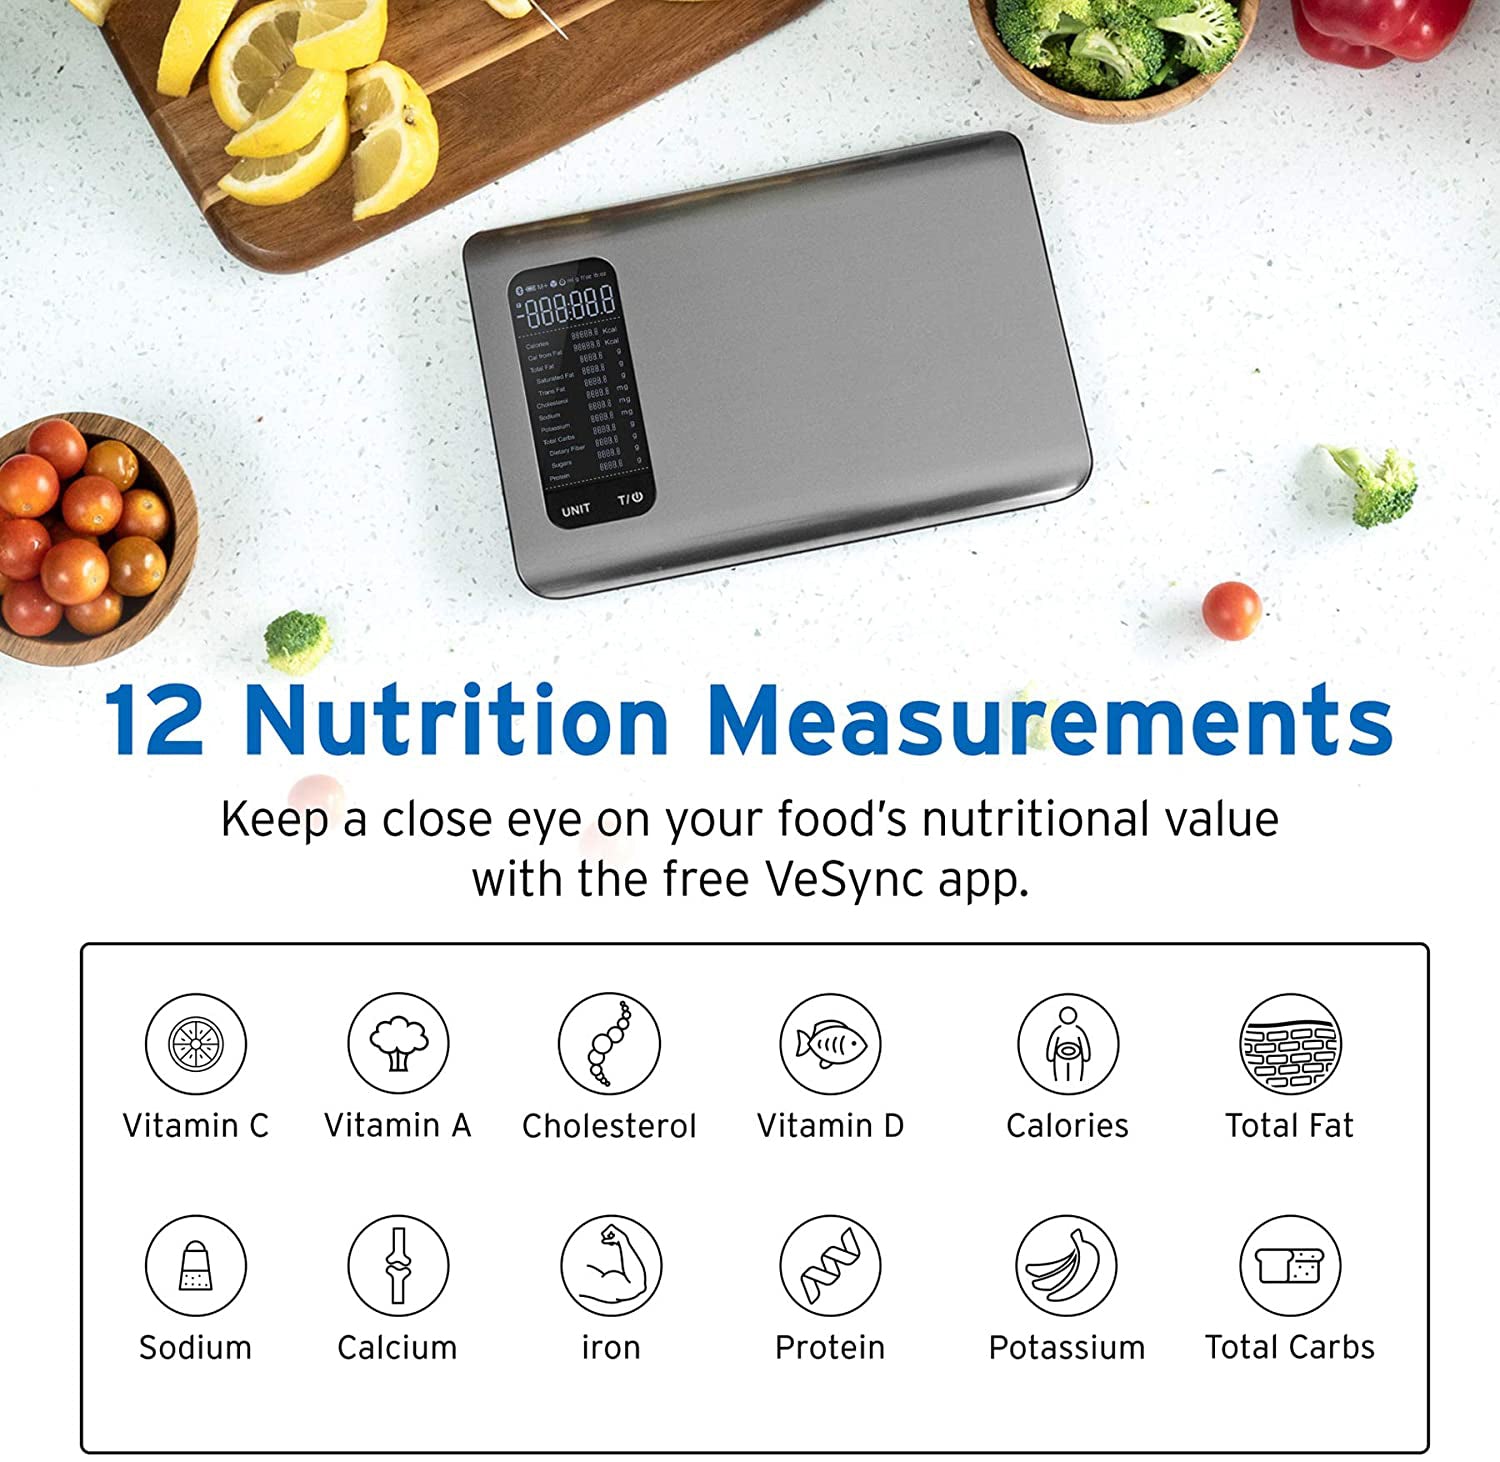 Kitchen Smart Scales for Weight Loss - HubPages